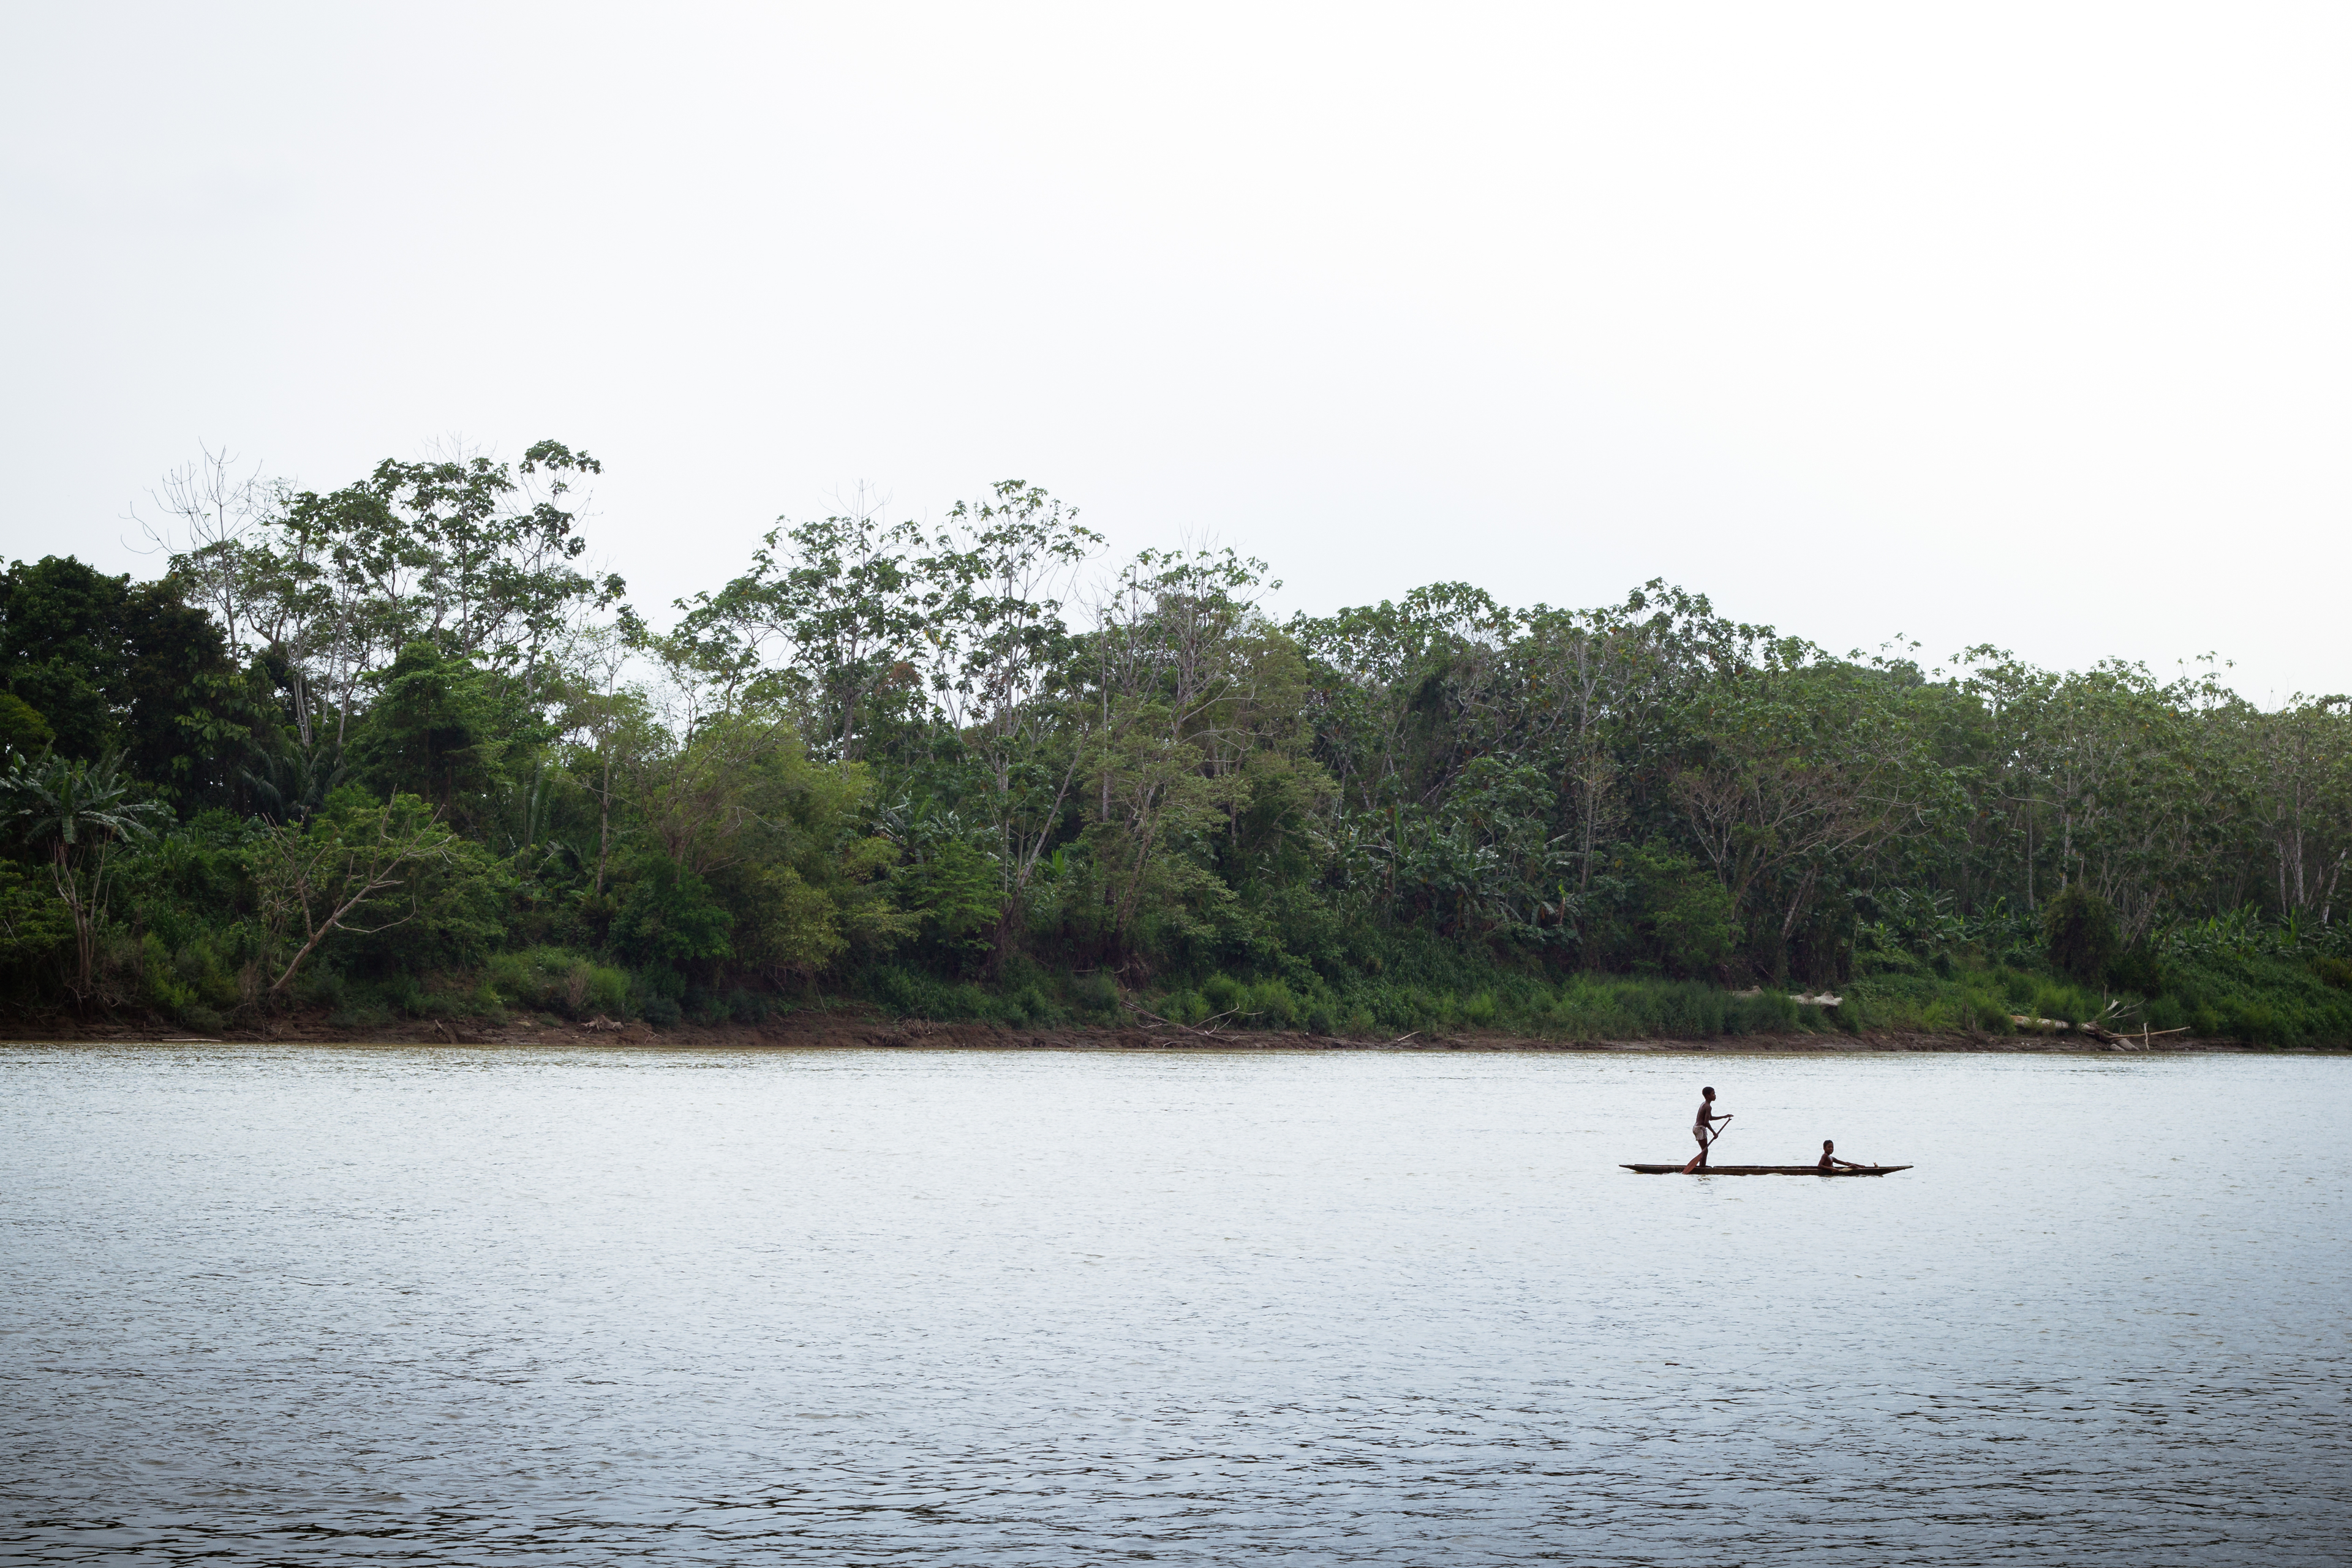 Families live close to or on the water for easy access to fishing. Rivers and other bodies of water enable transport for the community living in the remote Carmen del Darién area. (Photo Credit: Sixzero Media)